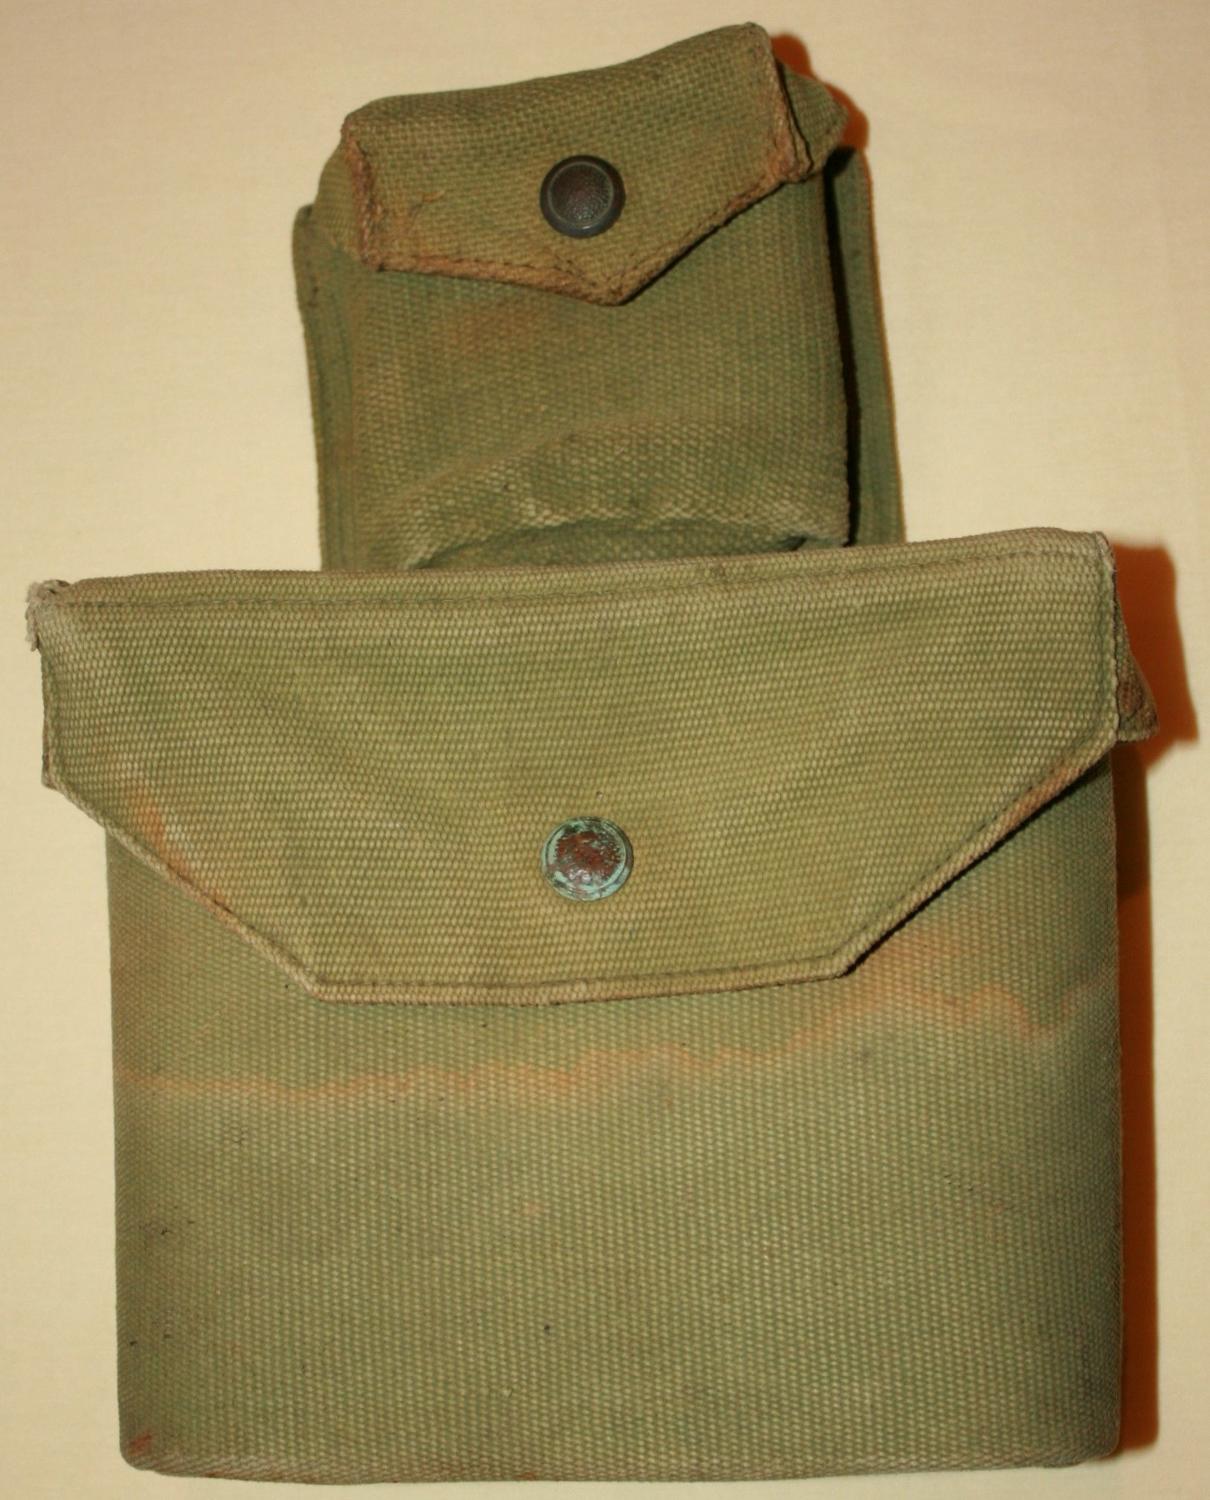 A GOOD USED PRE WWII OFFICERS INFANTRY EQUIPMENT BINOCULAR CASE